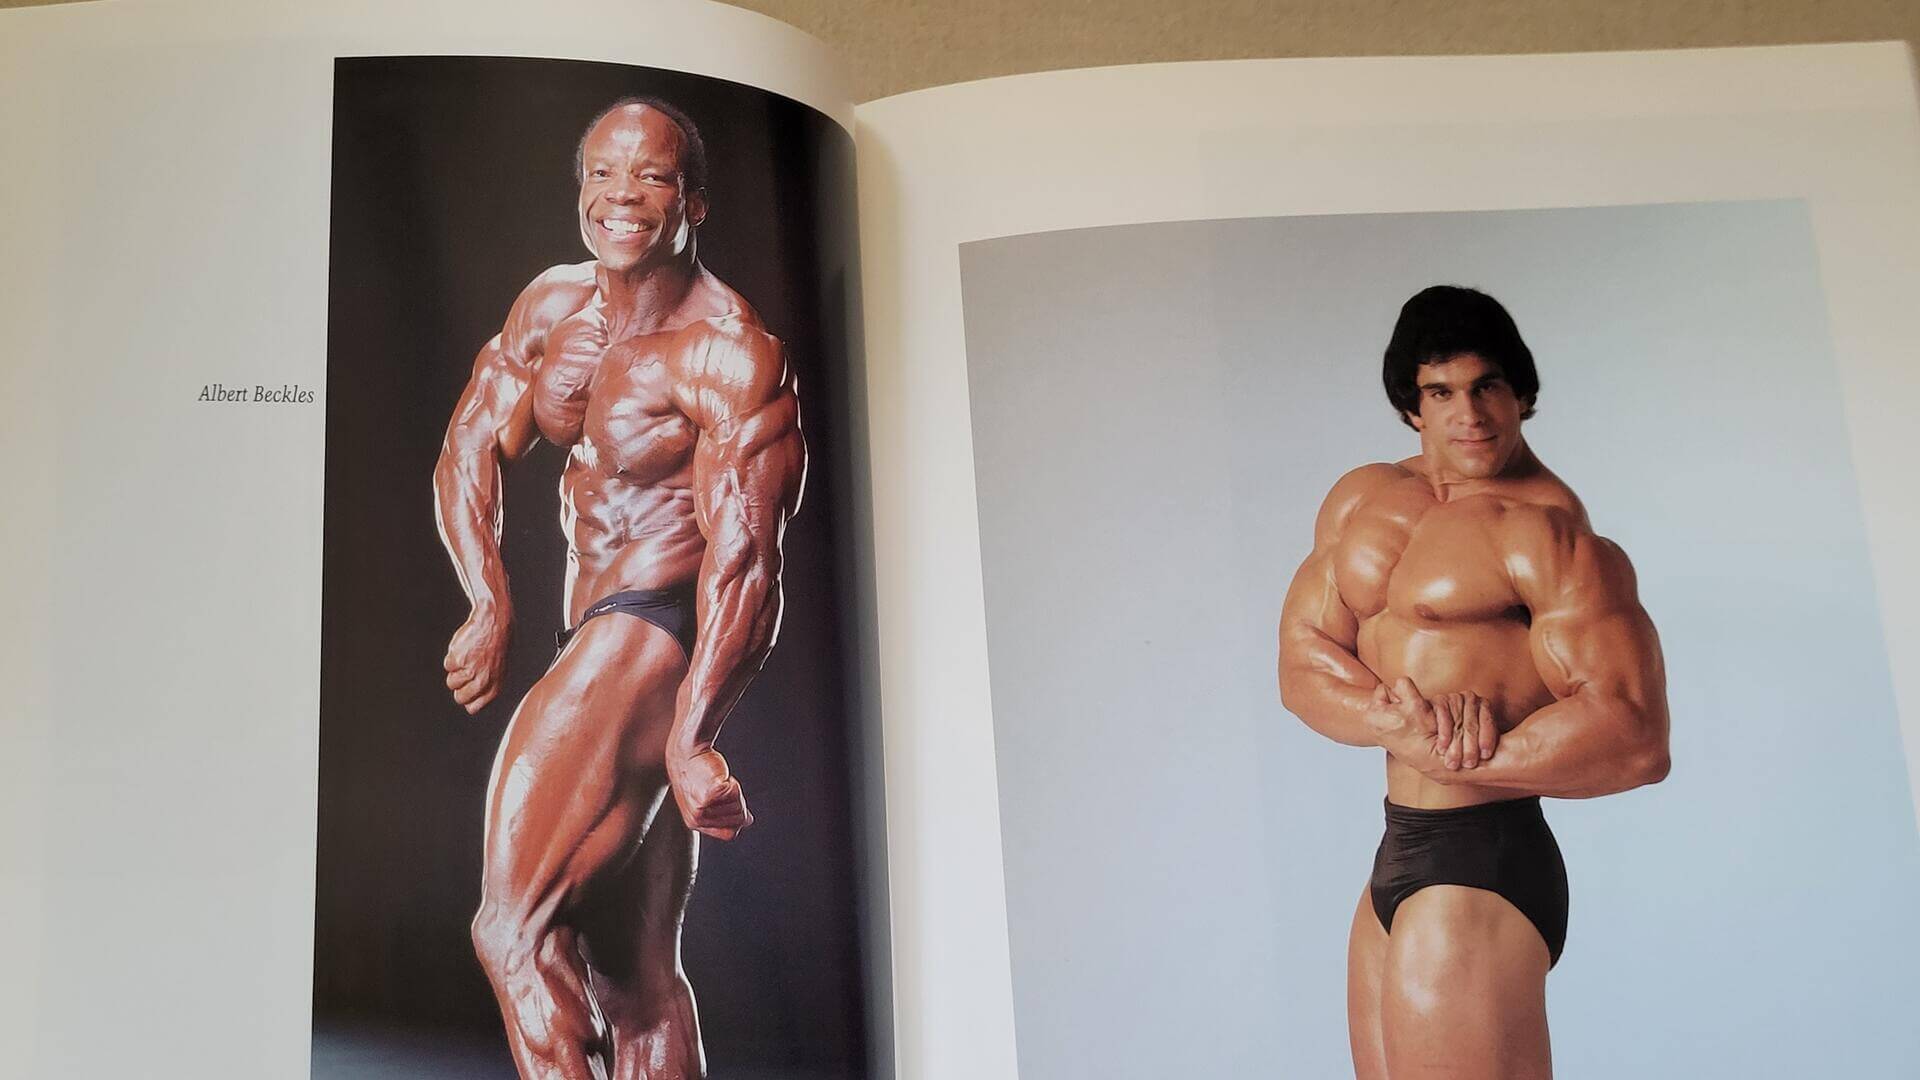 1980s vintage Encyclopedia of Modern Bodybuilding book by Arnold Schwarzenegger with Bill Dobbins. This first edition is collectible sports memorabilia and classic reference with more than 850 photographs and anatomical line drawings